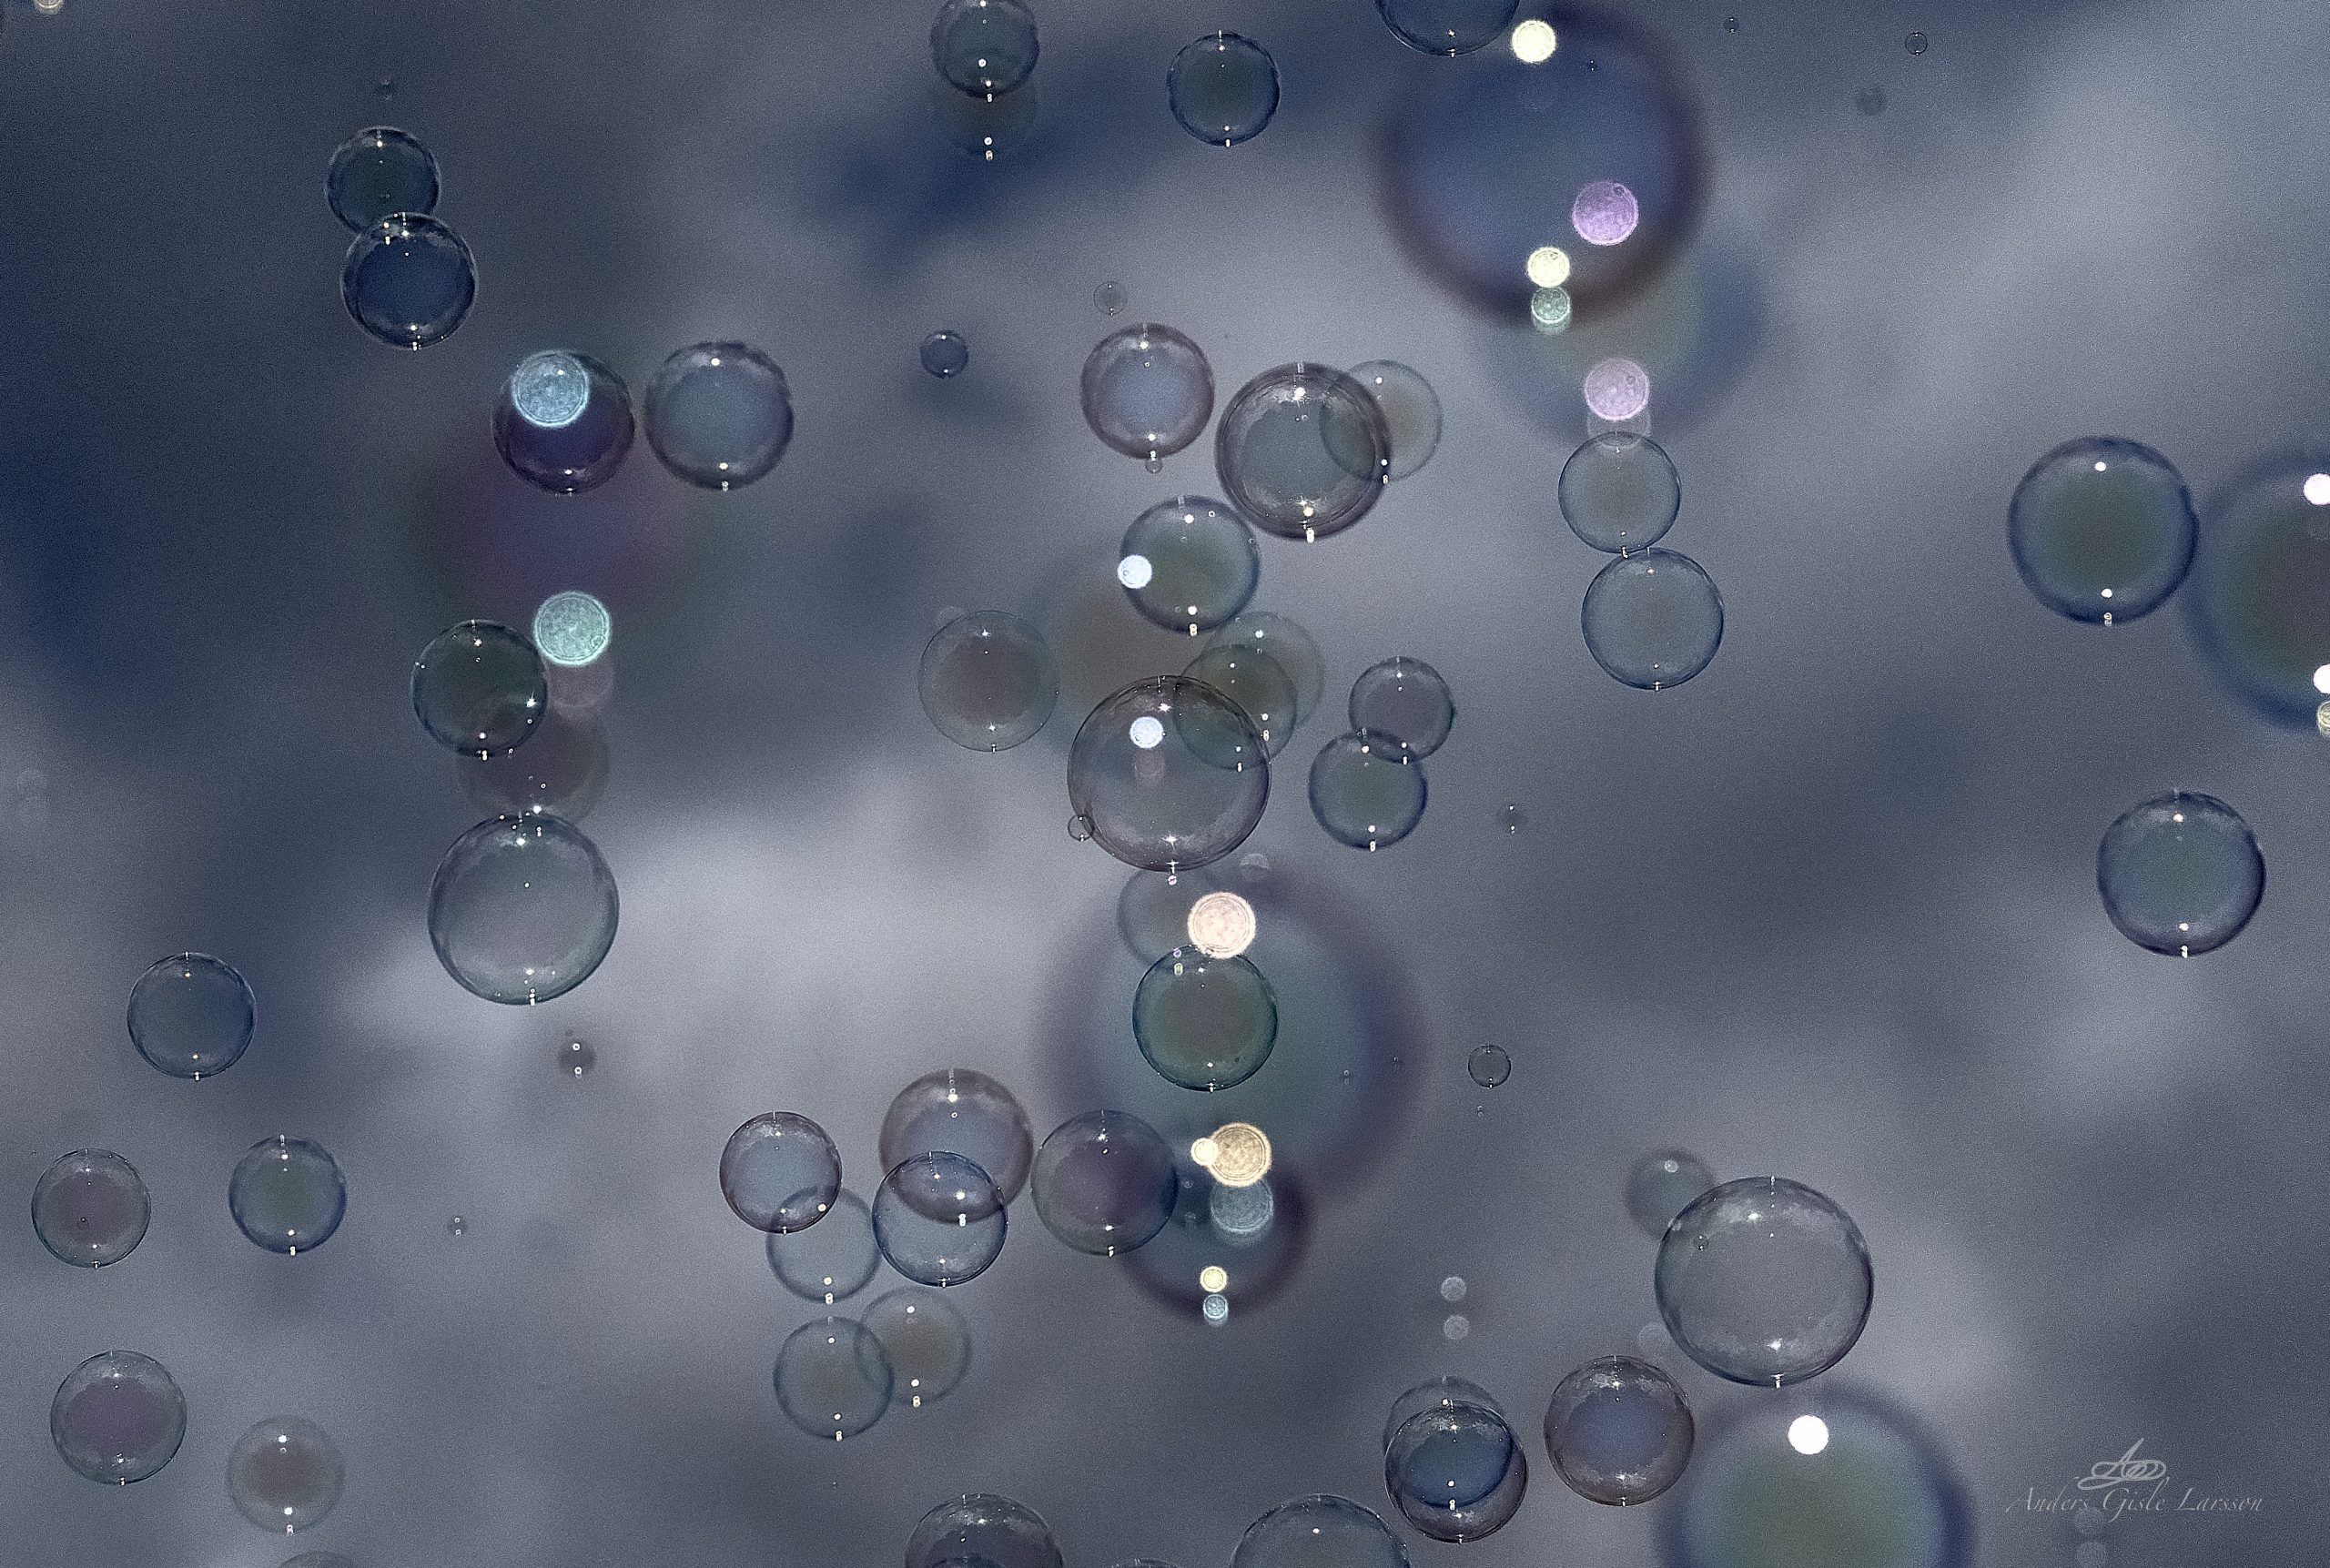 Outfall, 217/365, Uge 31, Assentoft, Randers  /  soap bubbles